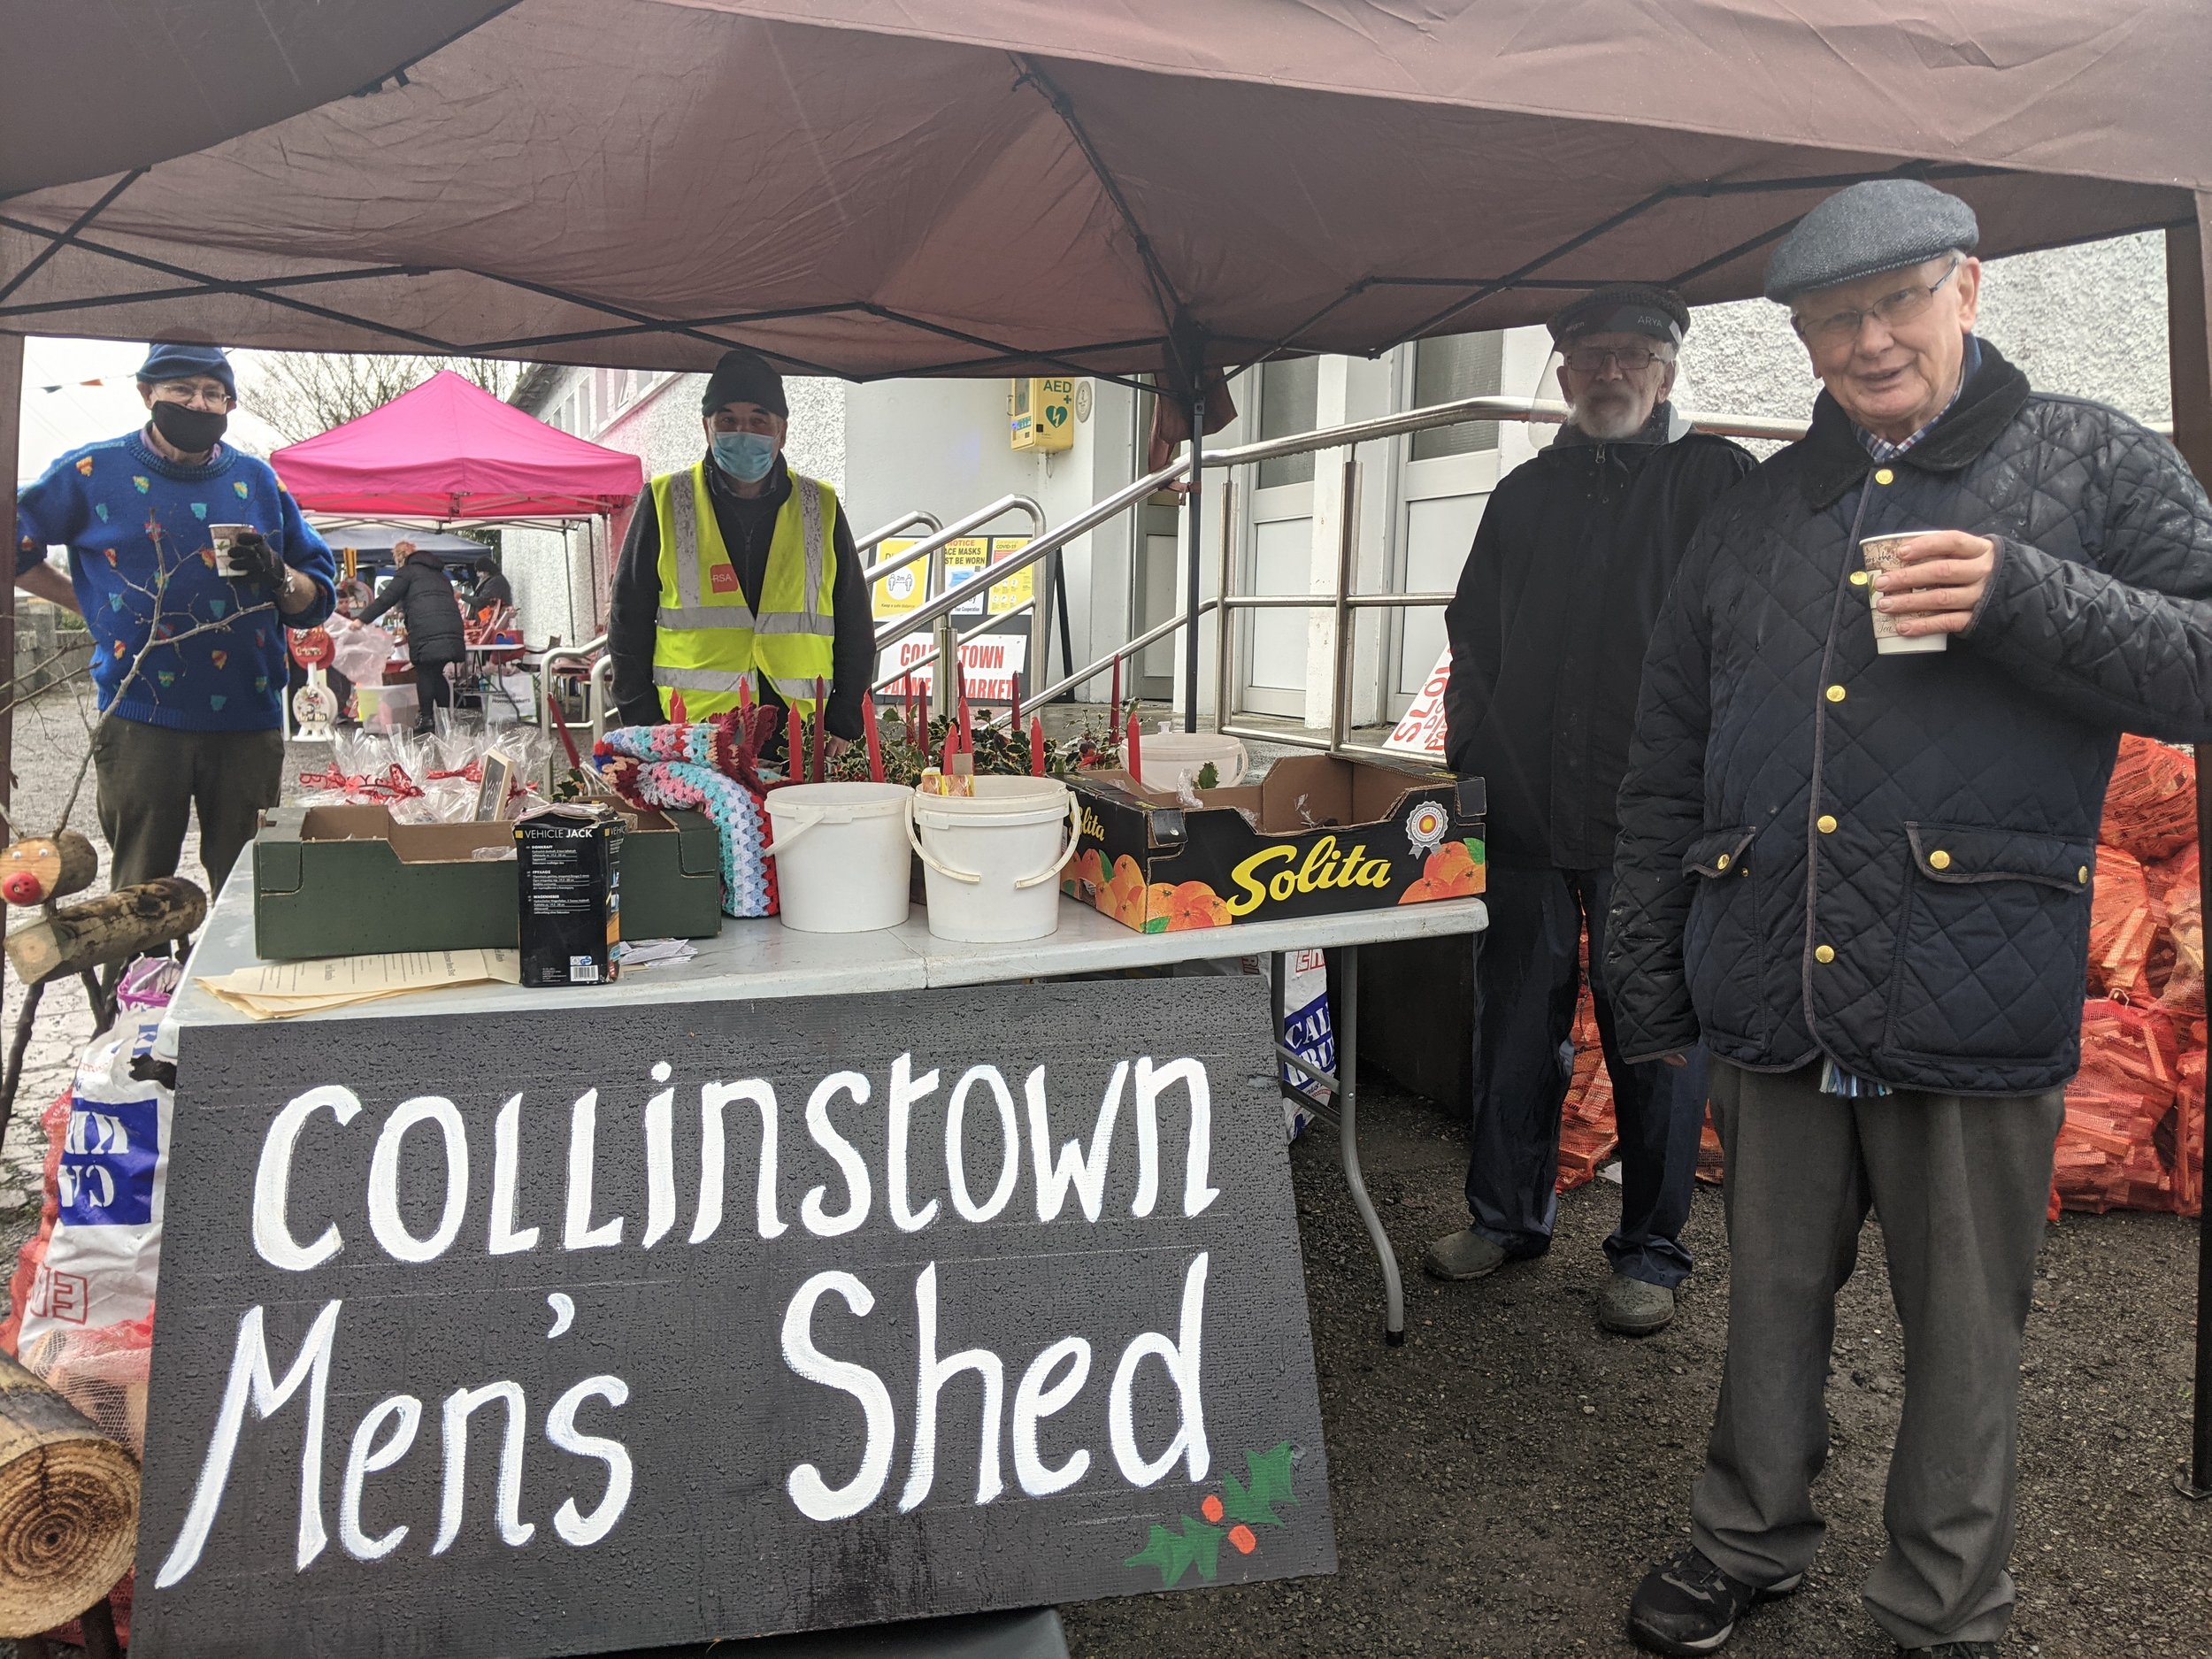 Collinstown Mens Shed at The Christmas Farmers Market